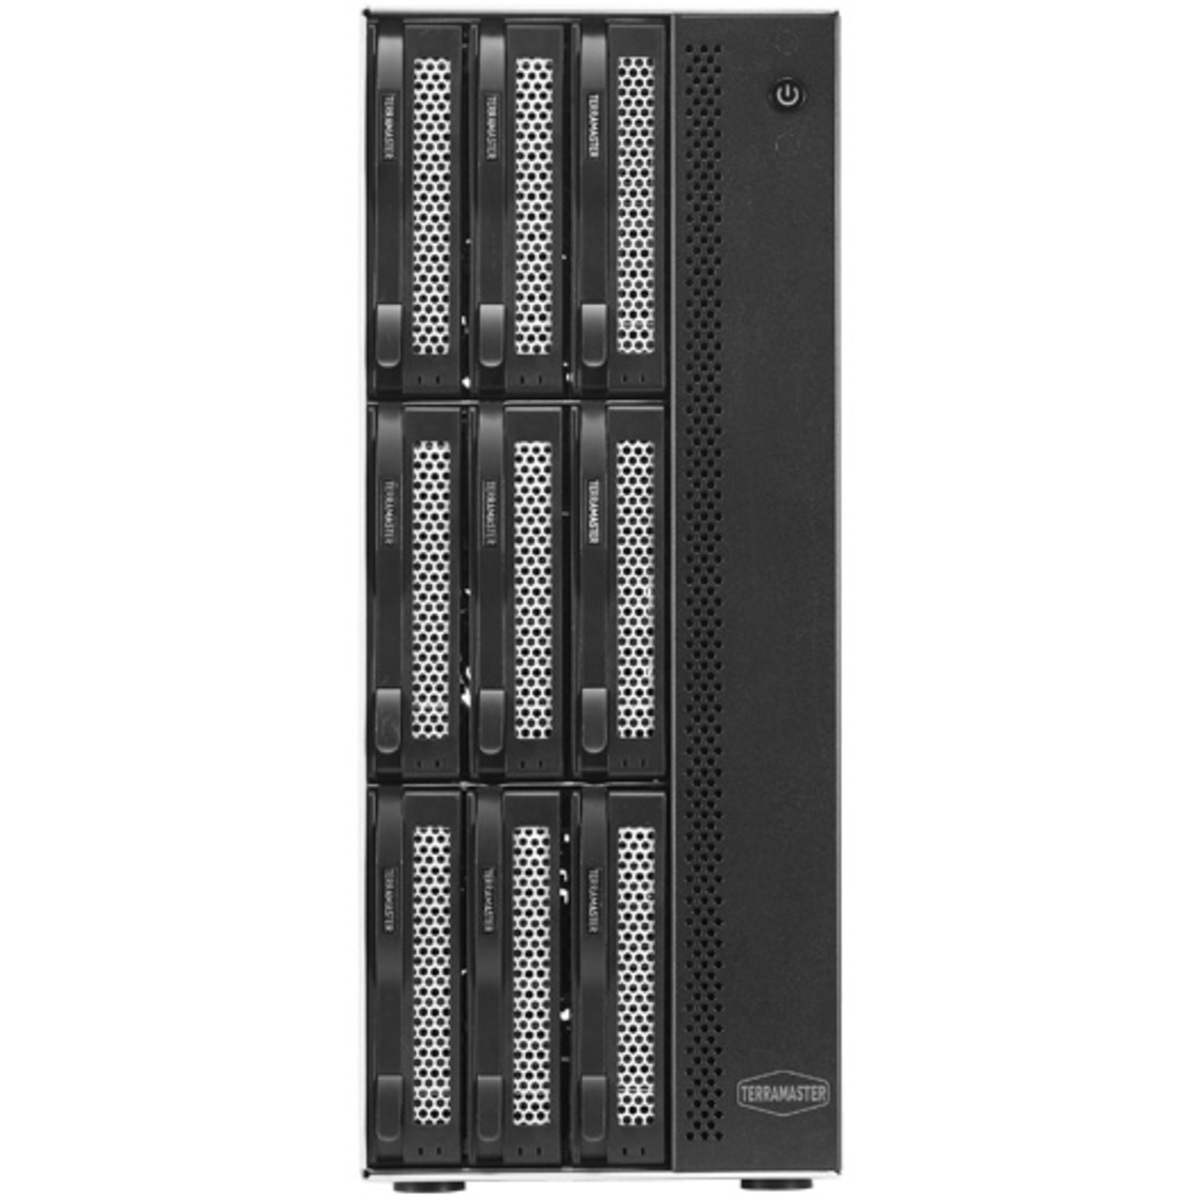 TerraMaster T9-423 84tb 9-Bay Desktop Multimedia / Power User / Business NAS - Network Attached Storage Device 7x12tb Seagate IronWolf ST12000VN0008 3.5 7200rpm SATA 6Gb/s HDD NAS Class Drives Installed - Burn-In Tested T9-423